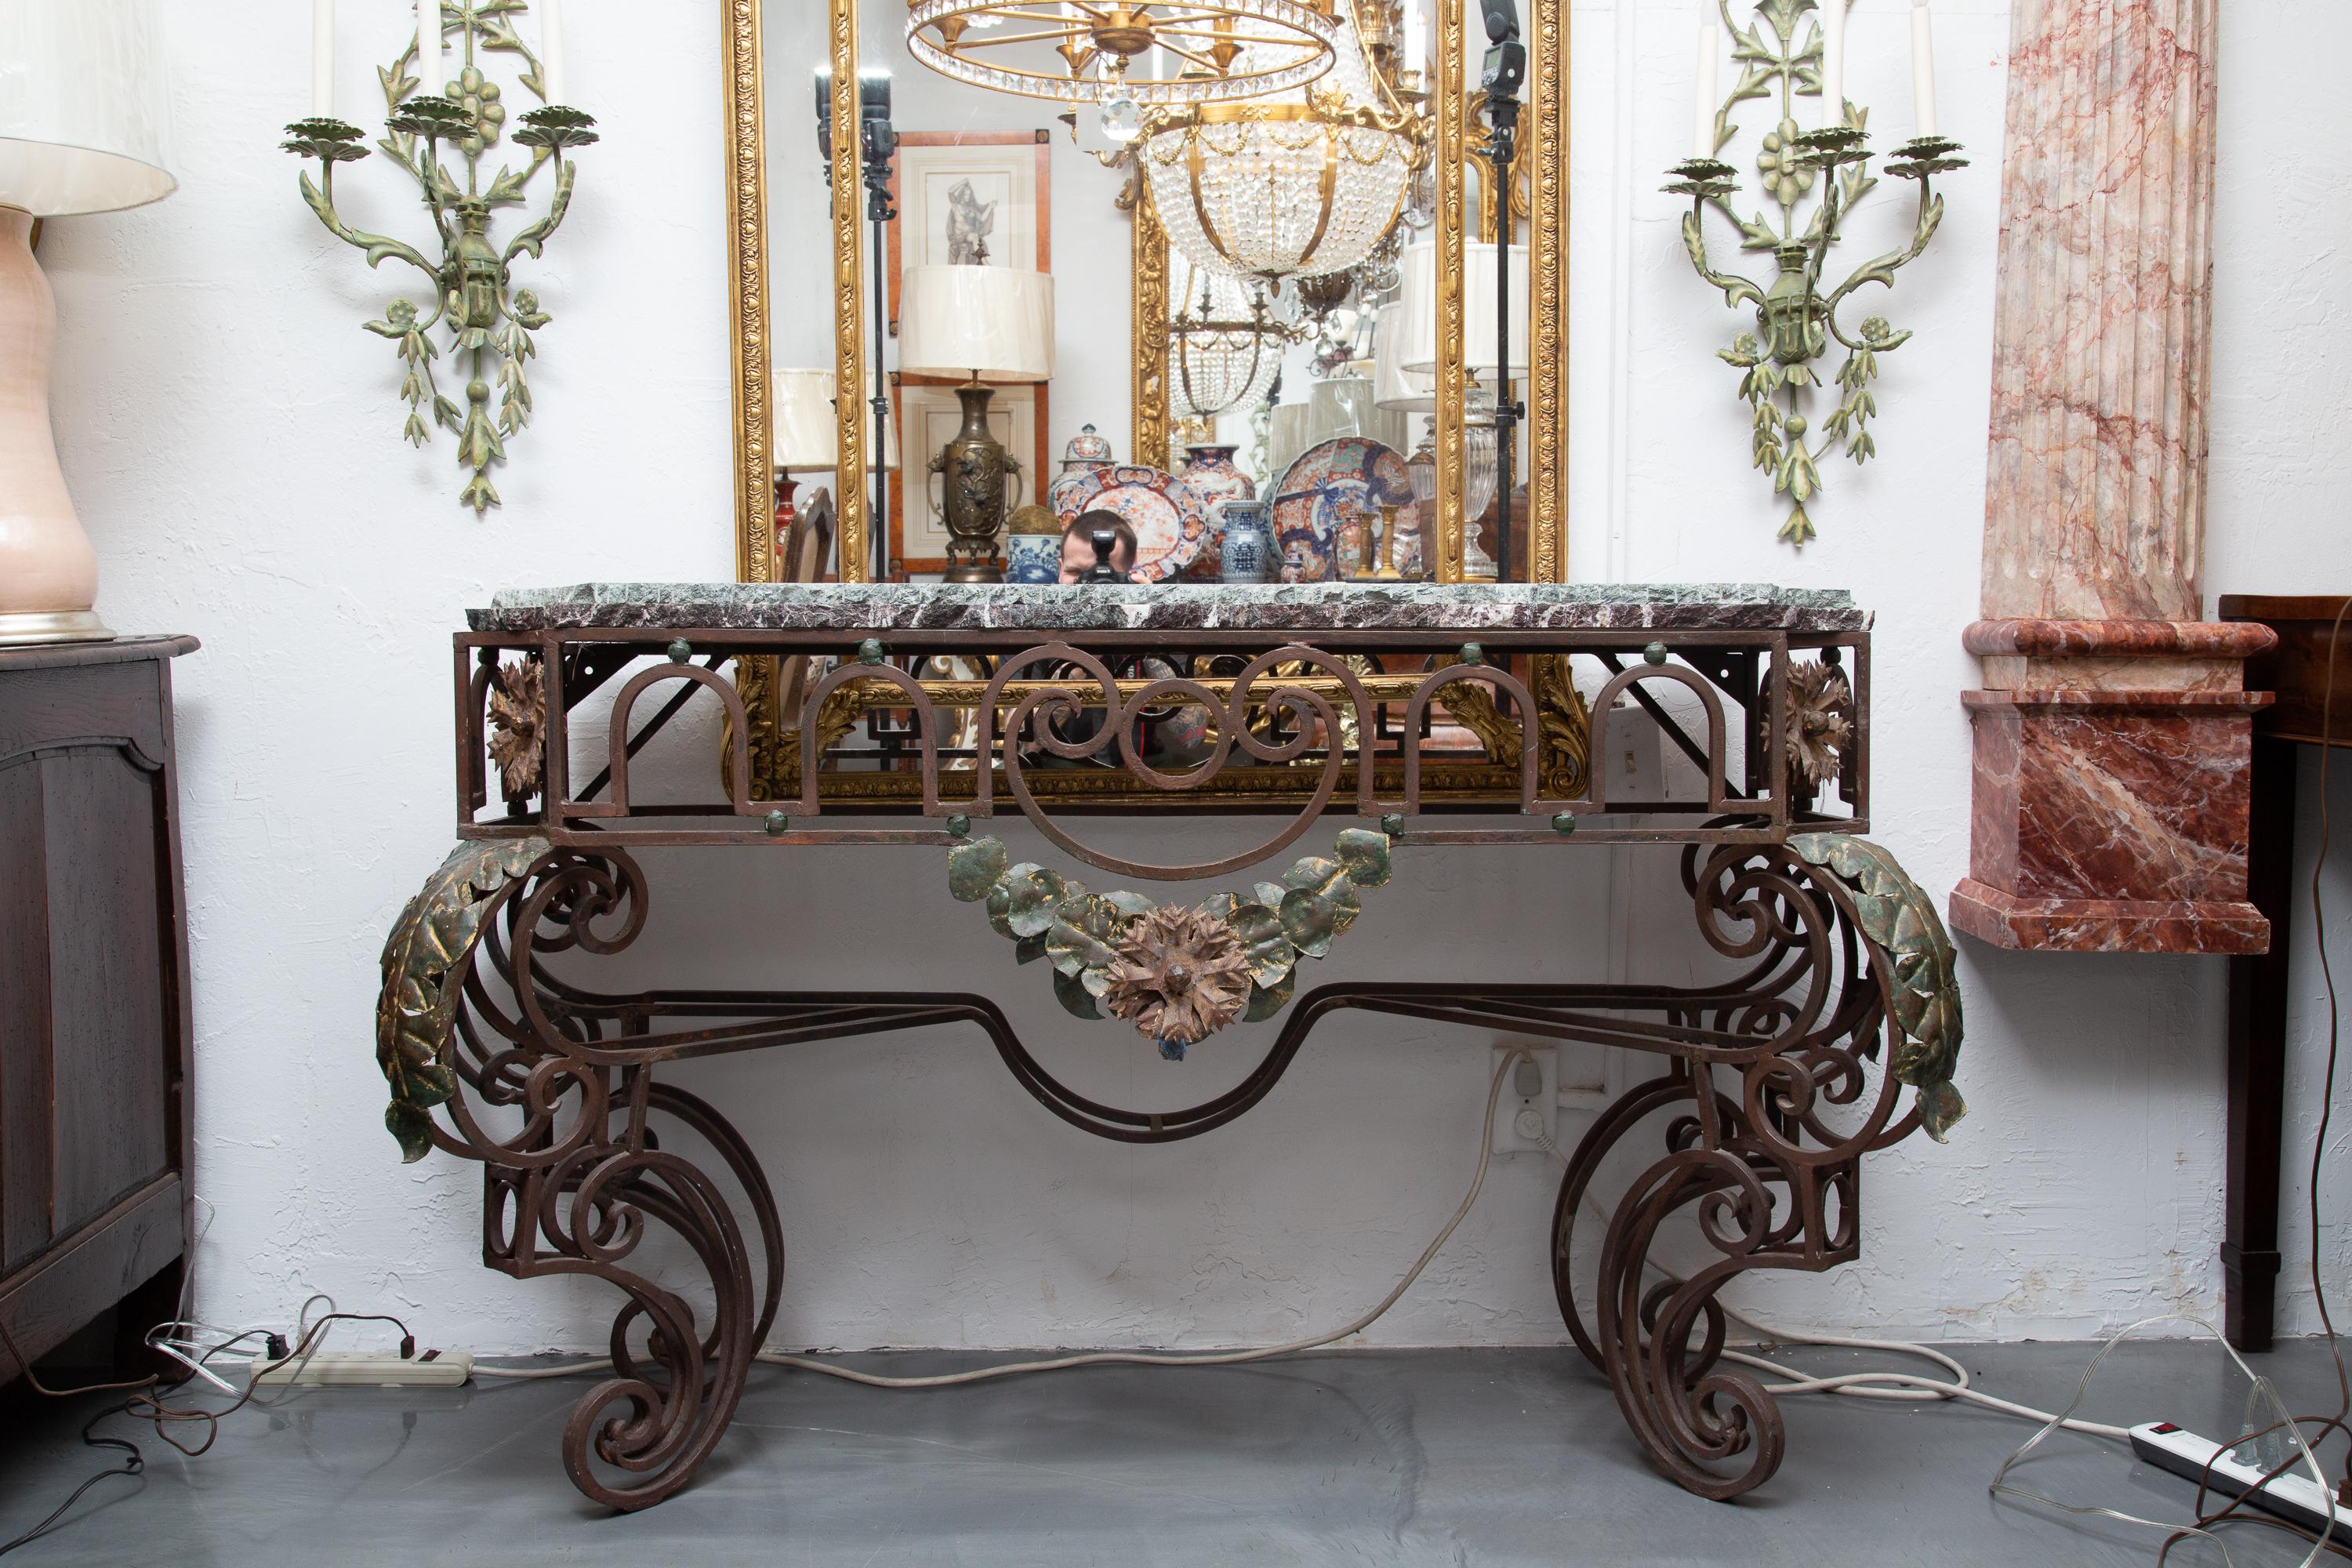 This is an interesting French iron console. The double marble tops with chiseled edge rests over a prominent ornamental frieze with centered polychromed floral spray and supported by out-scrolling intricately forged legs with polychrome leaf